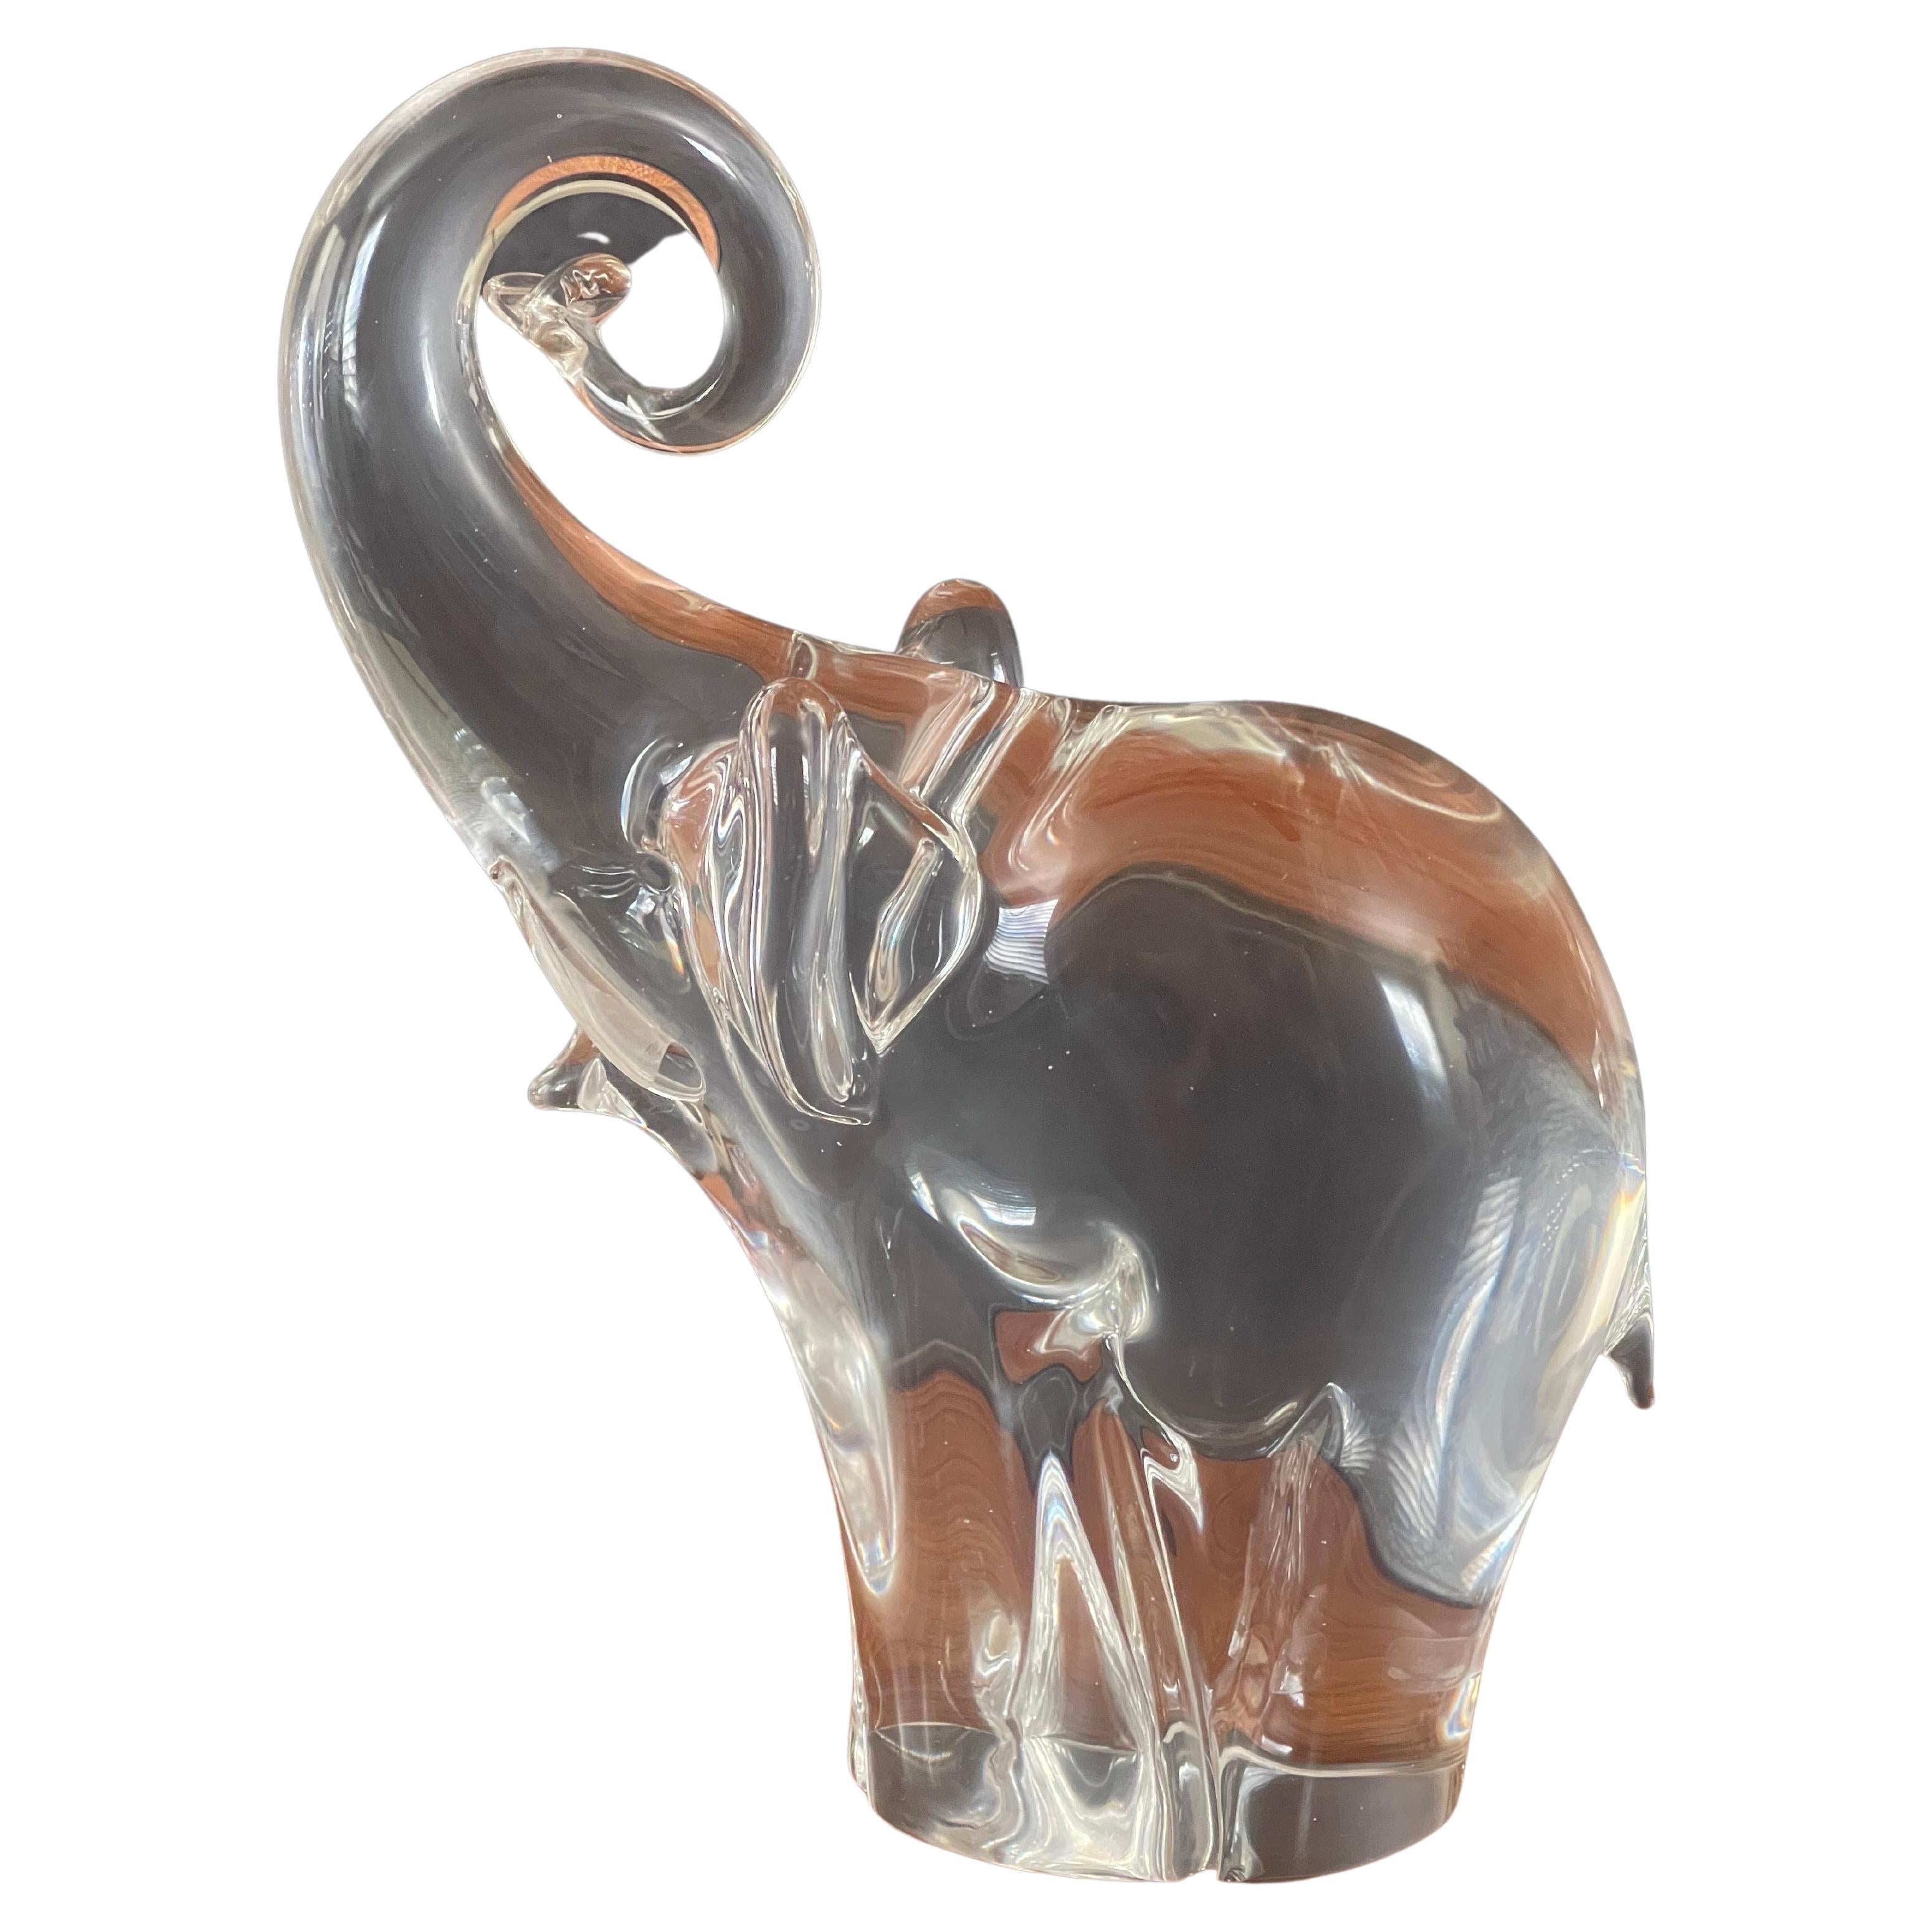 Beautiful art glass elephant sculpture by Oggetti for Murano glass, circa 1970s. The sculpture is in very good condition with no chips or cracks (some scratches on the underside) and measures 8